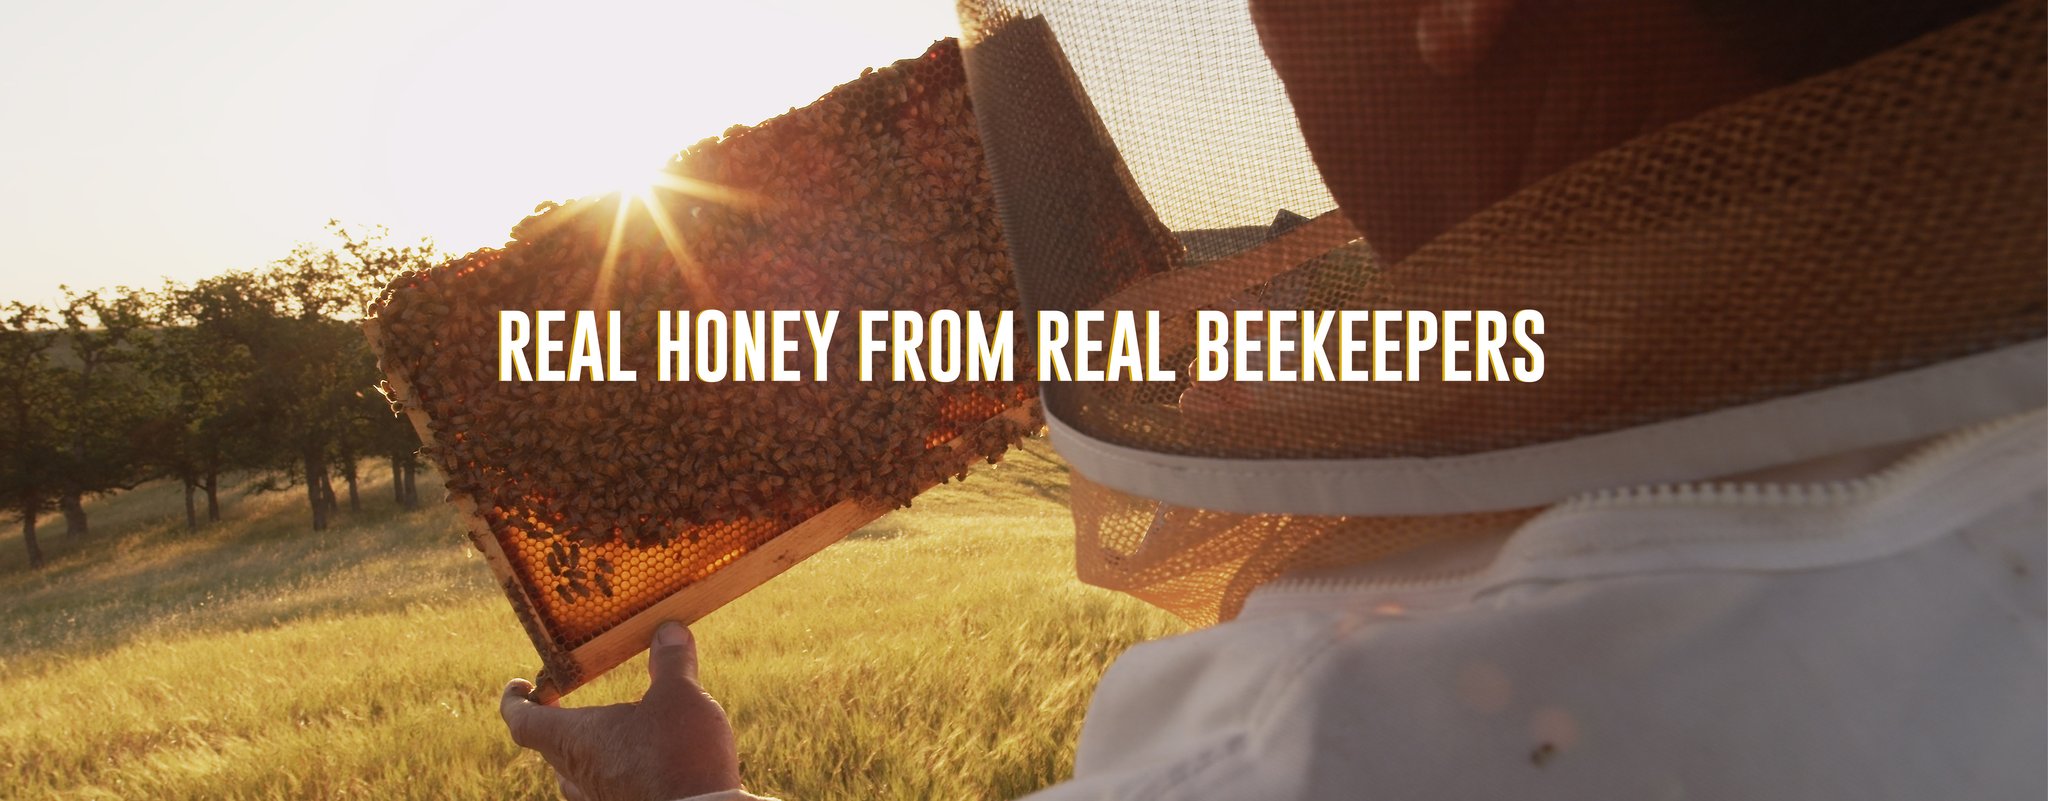 real honey from real beekeepers